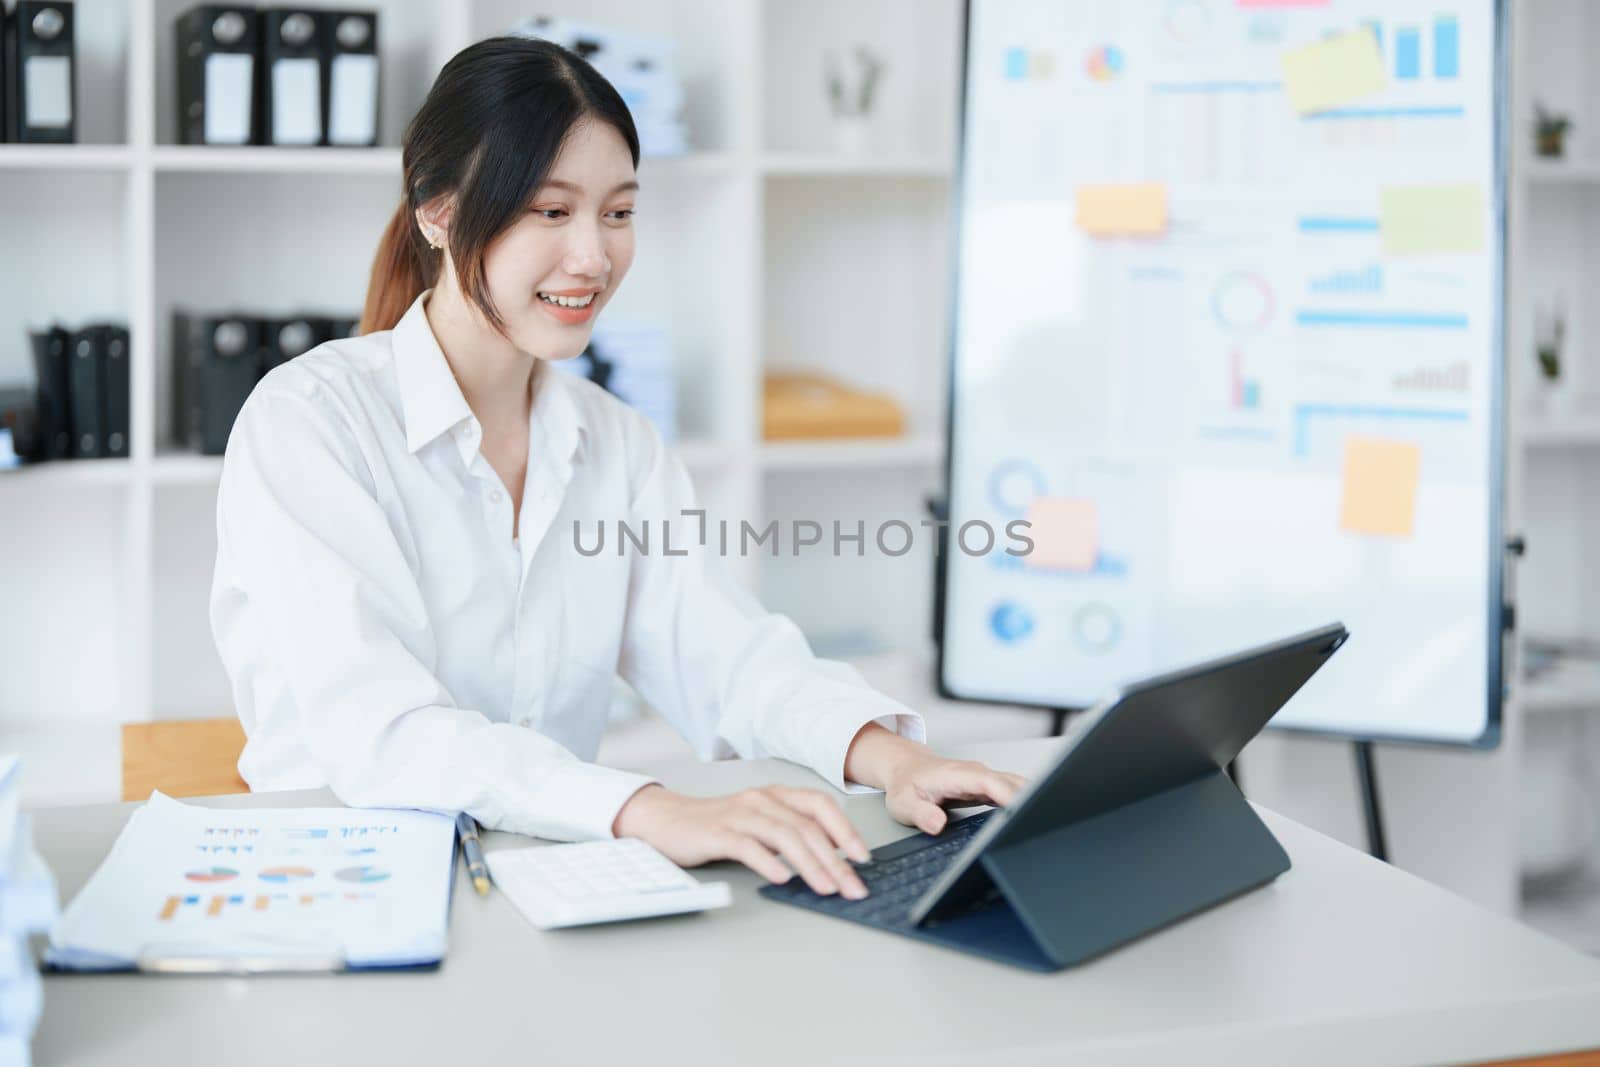 Portrait of a thoughtful Asian businesswoman looking at financial statements and making marketing plans using a computer on her desk.